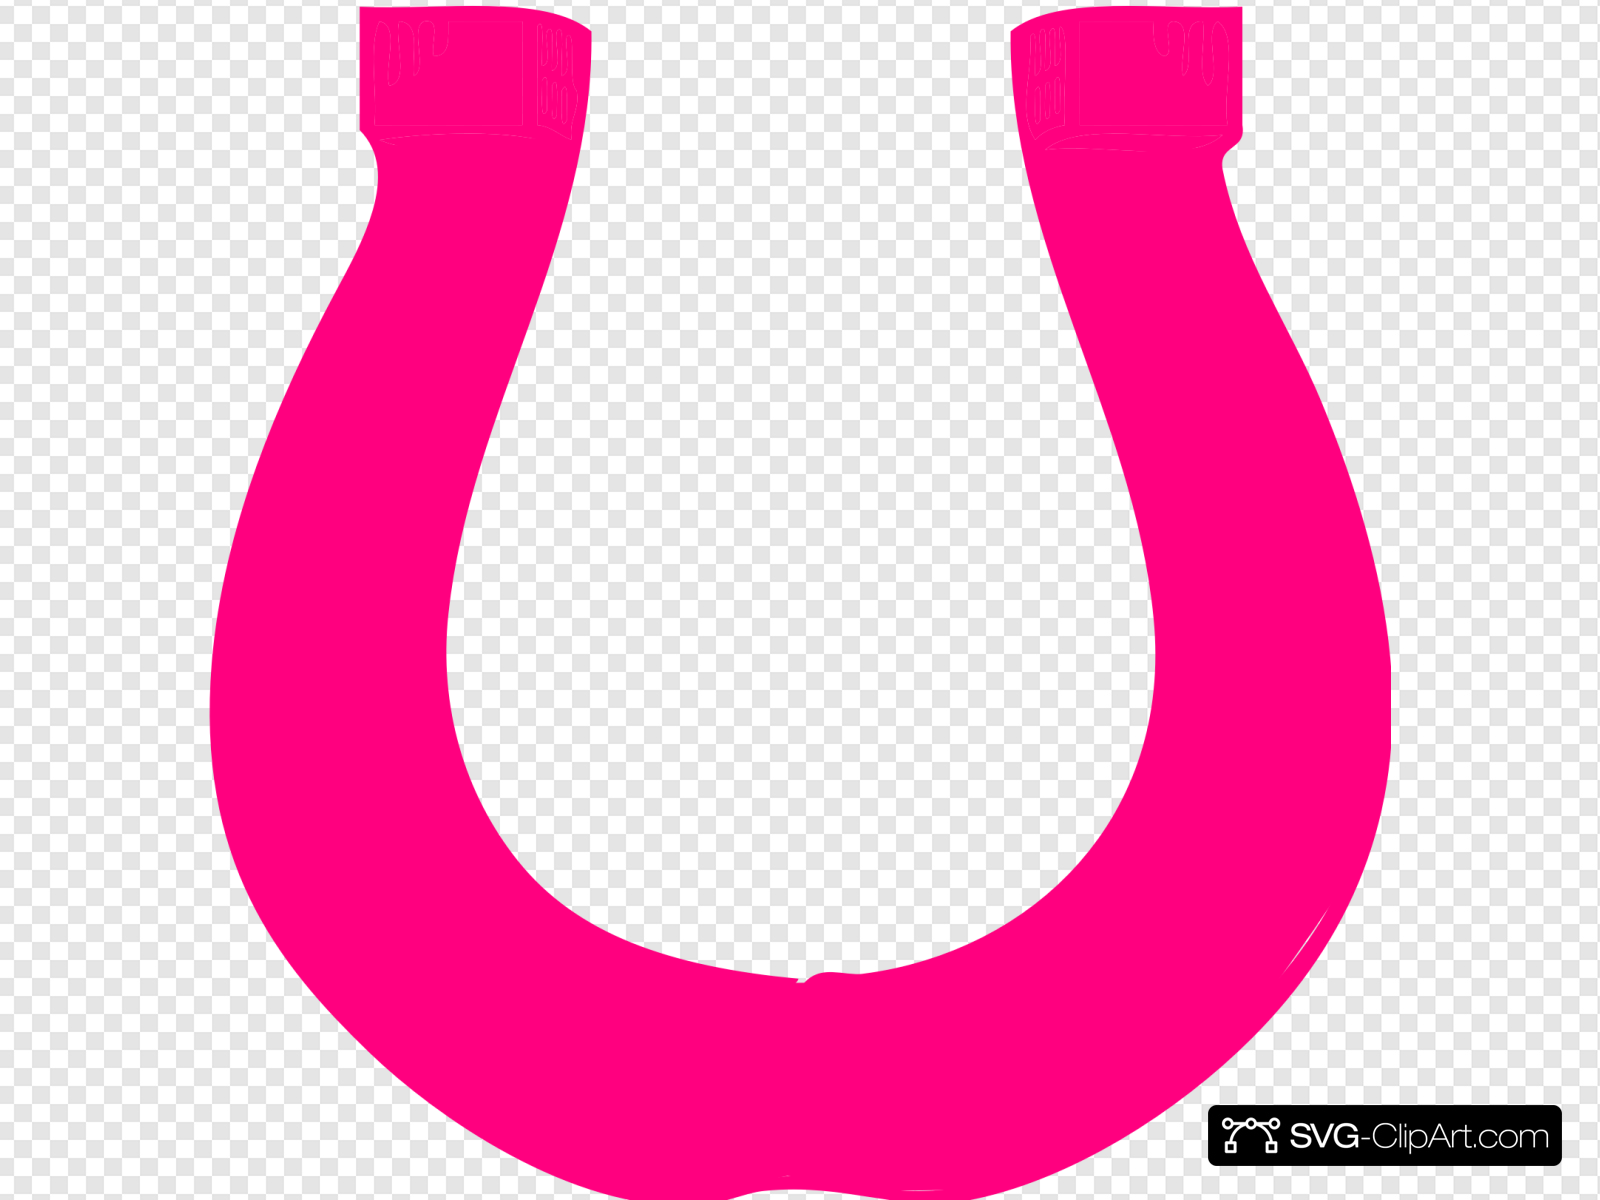 Pink Horseshoe Clip art, Icon and SVG.